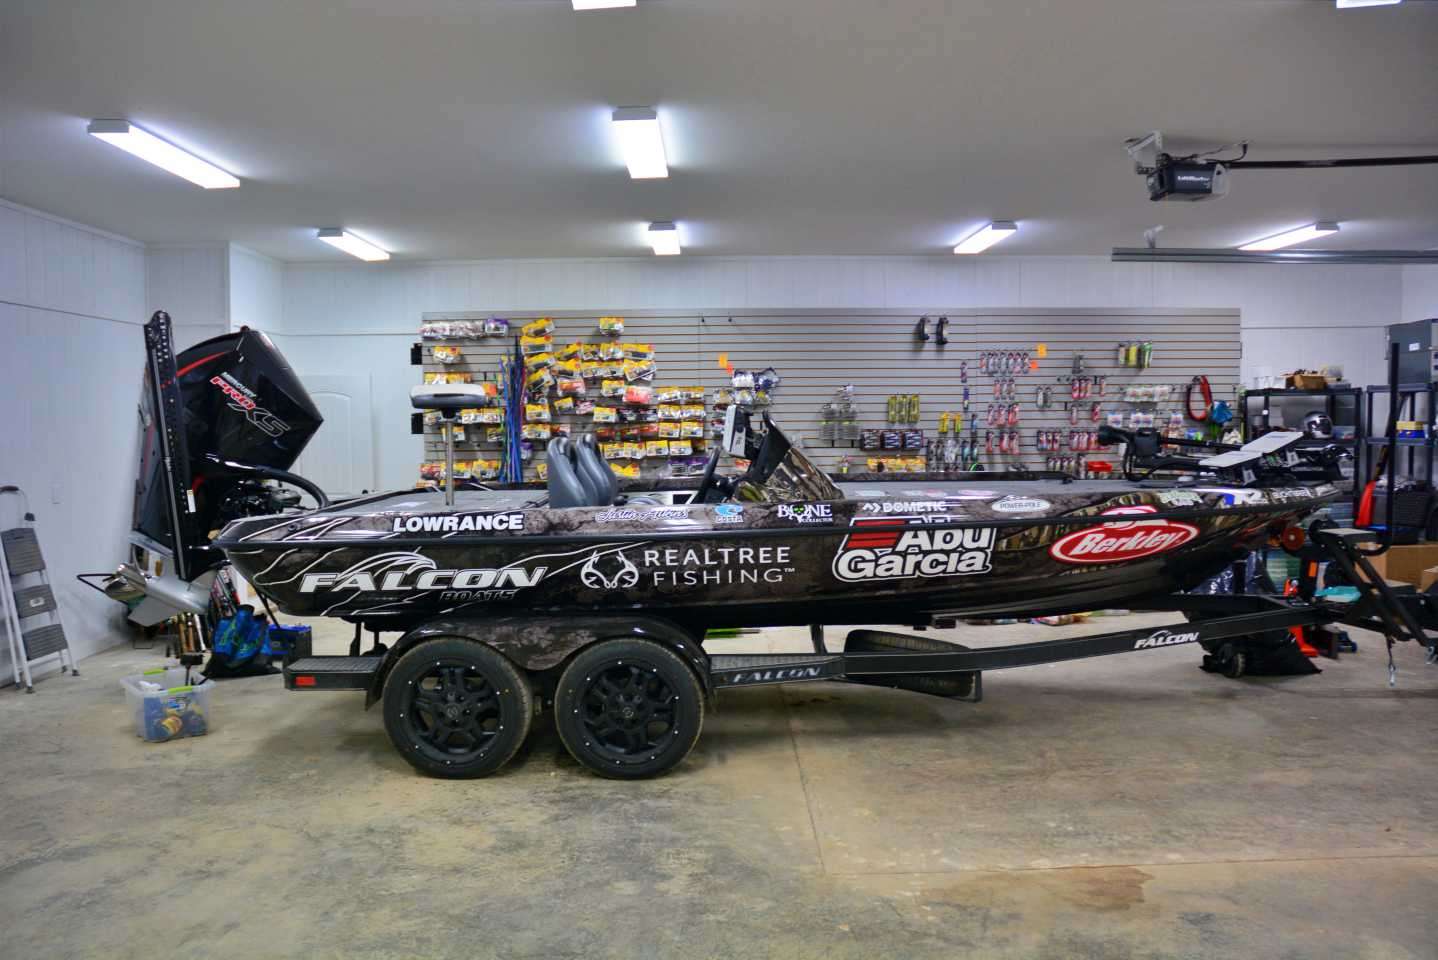 When these photos were taken, the 2021 Bassmaster Elite Series season kickoff was just two weeks away. The shop was abuzz with activity in preparation for the slate of events running from early February through July. 